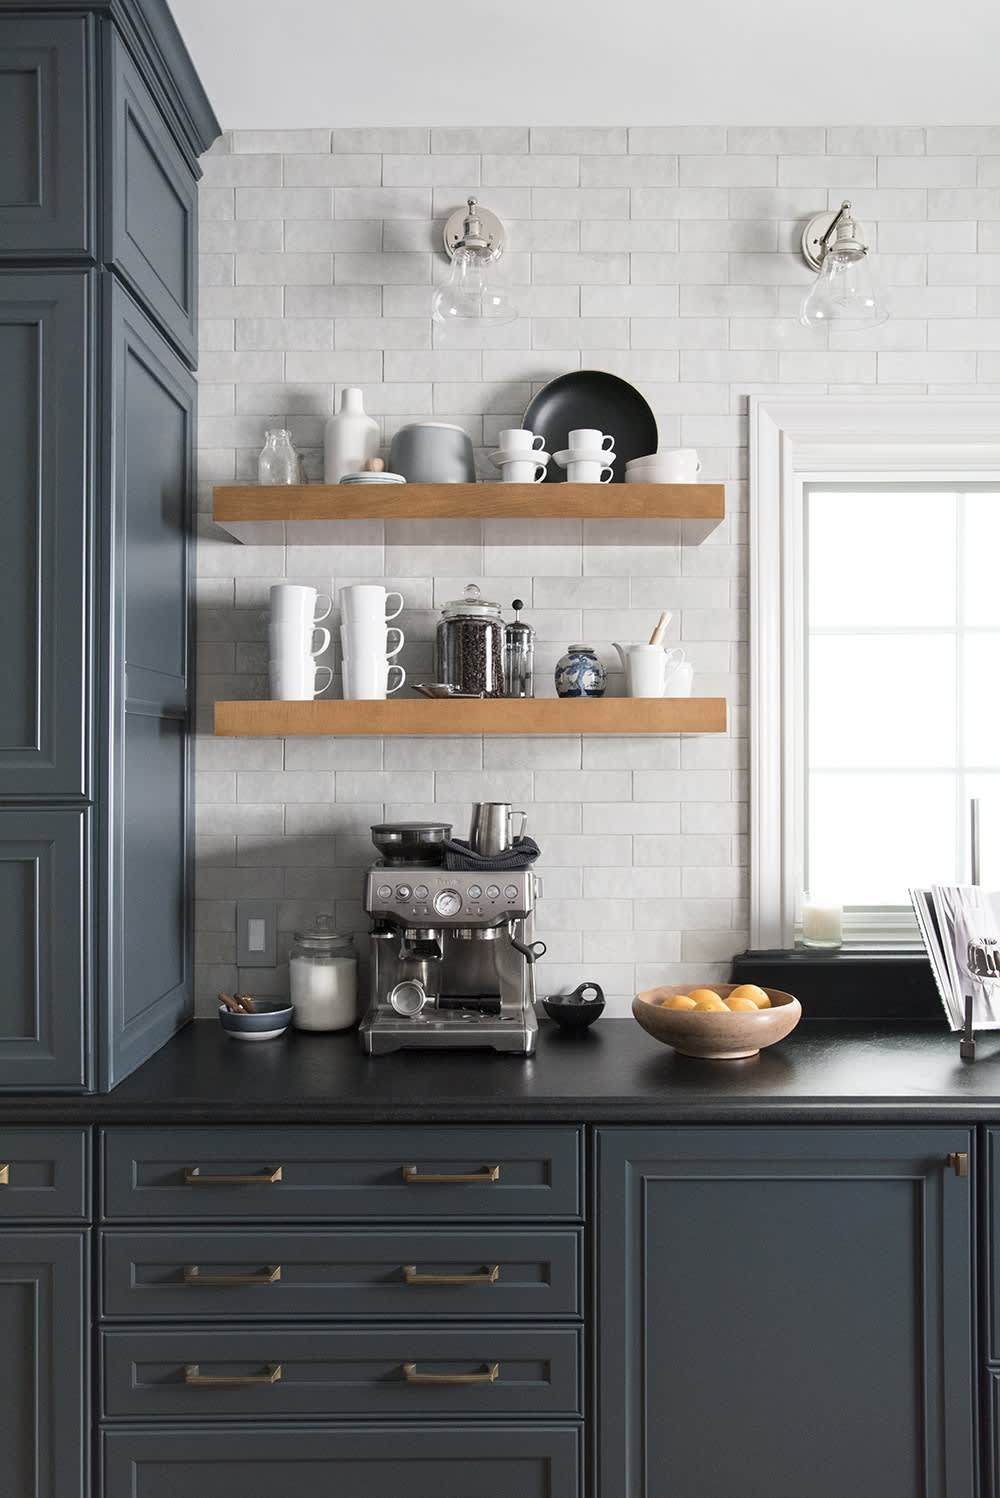 20 Kitchen Shelf Ideas That Will Double Your Storage Space ...